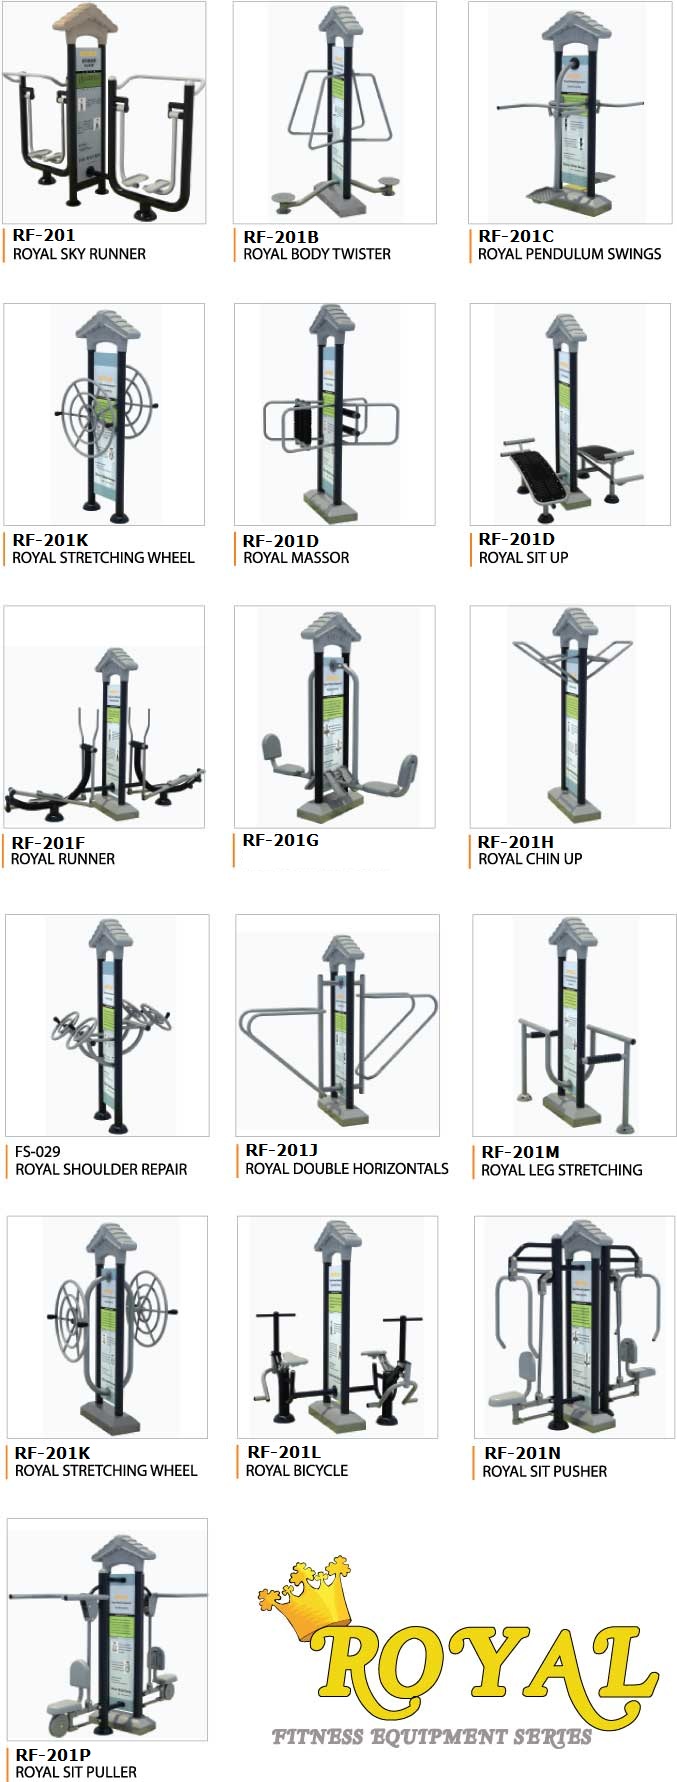 Royal outdoor fitness equipment